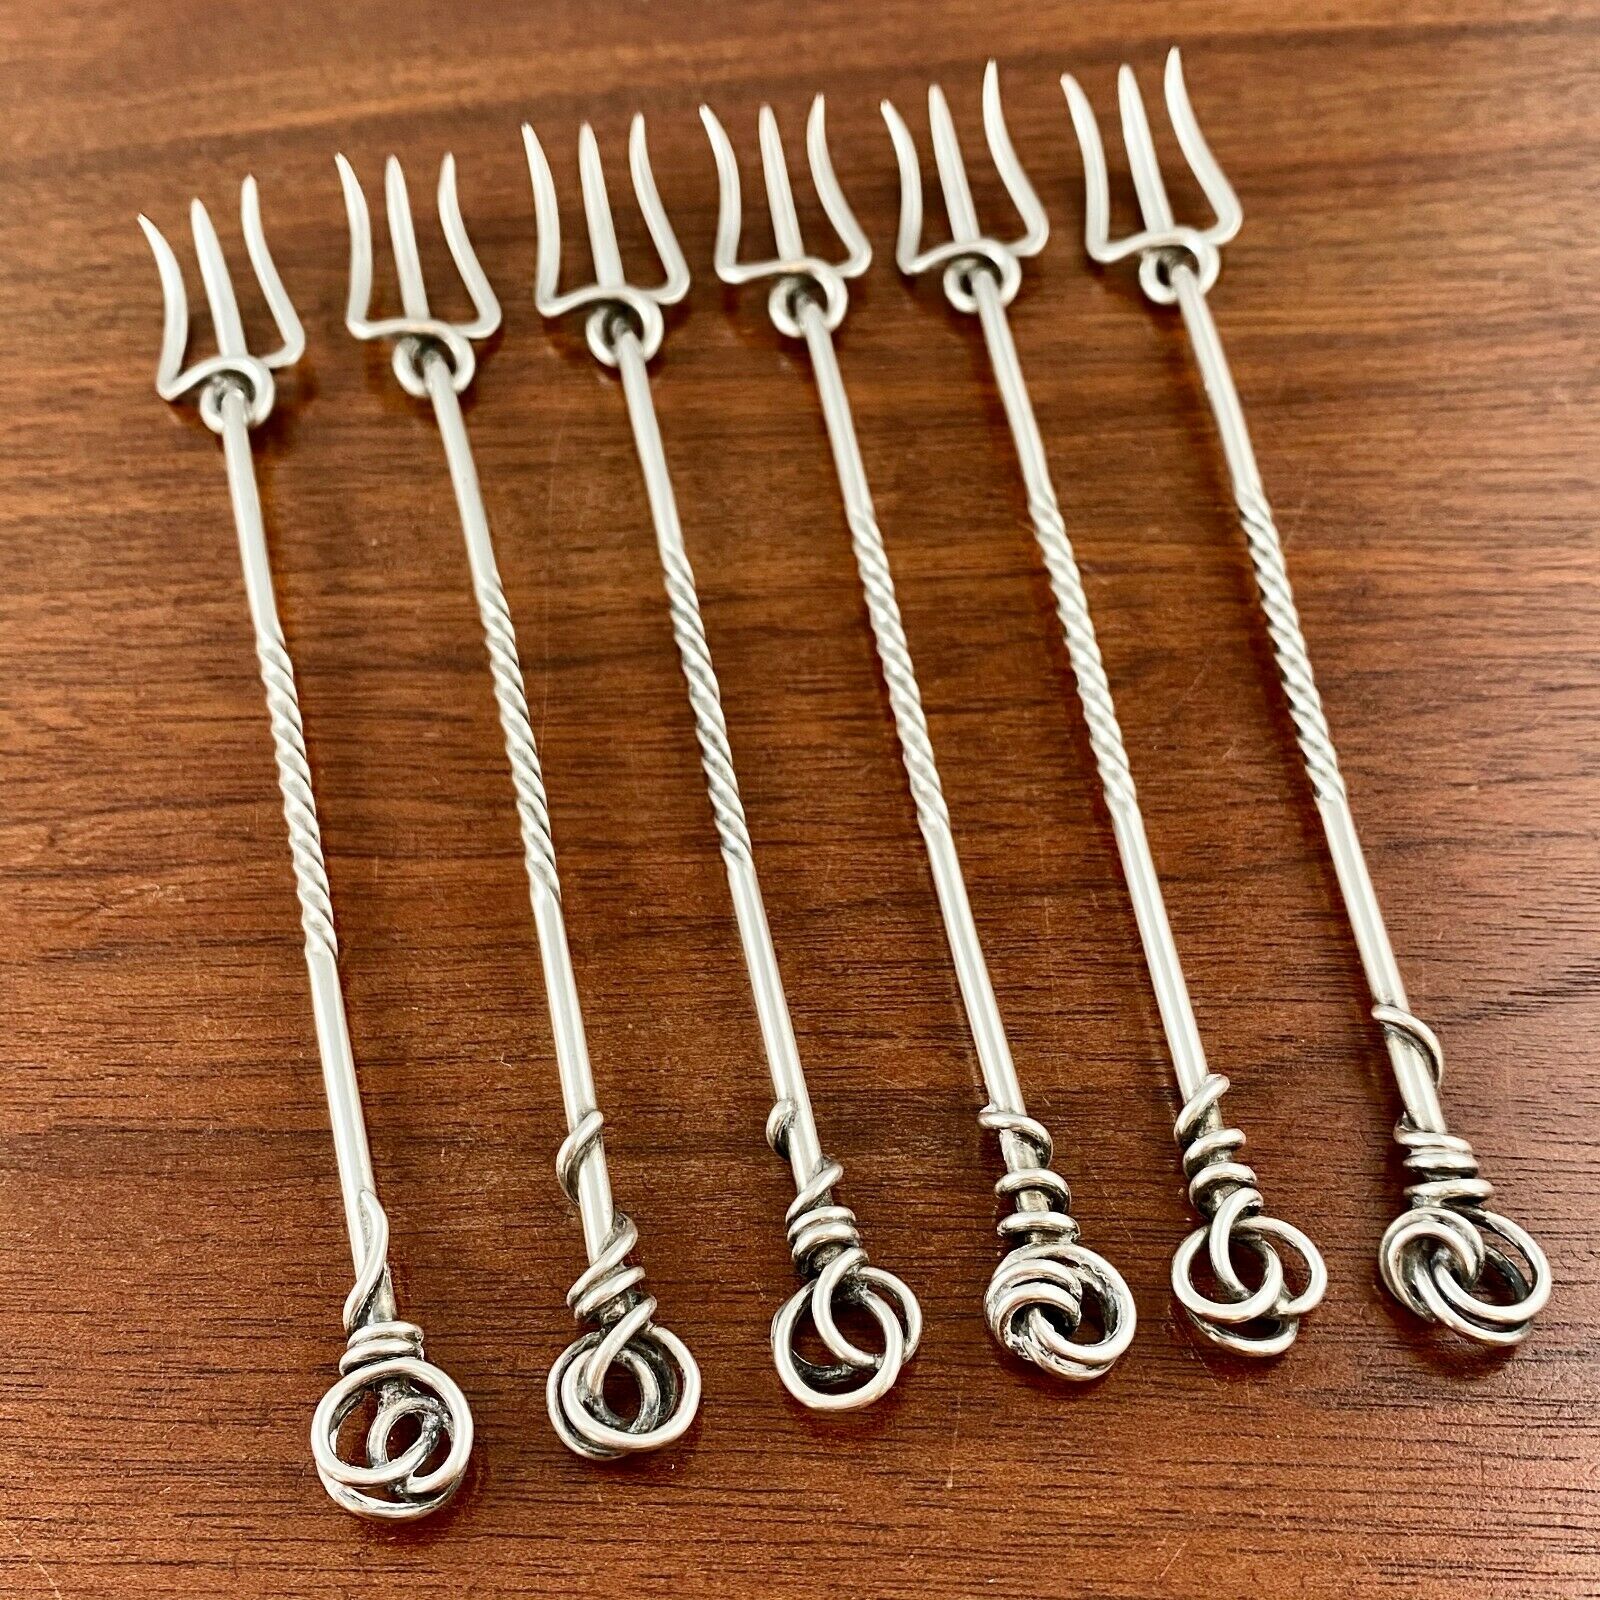 Antique Valuations: VERY RARE SHIEBLER AESTHETIC STERLING SILVER SEAFOOD COCKTAIL FORKS NO MONO